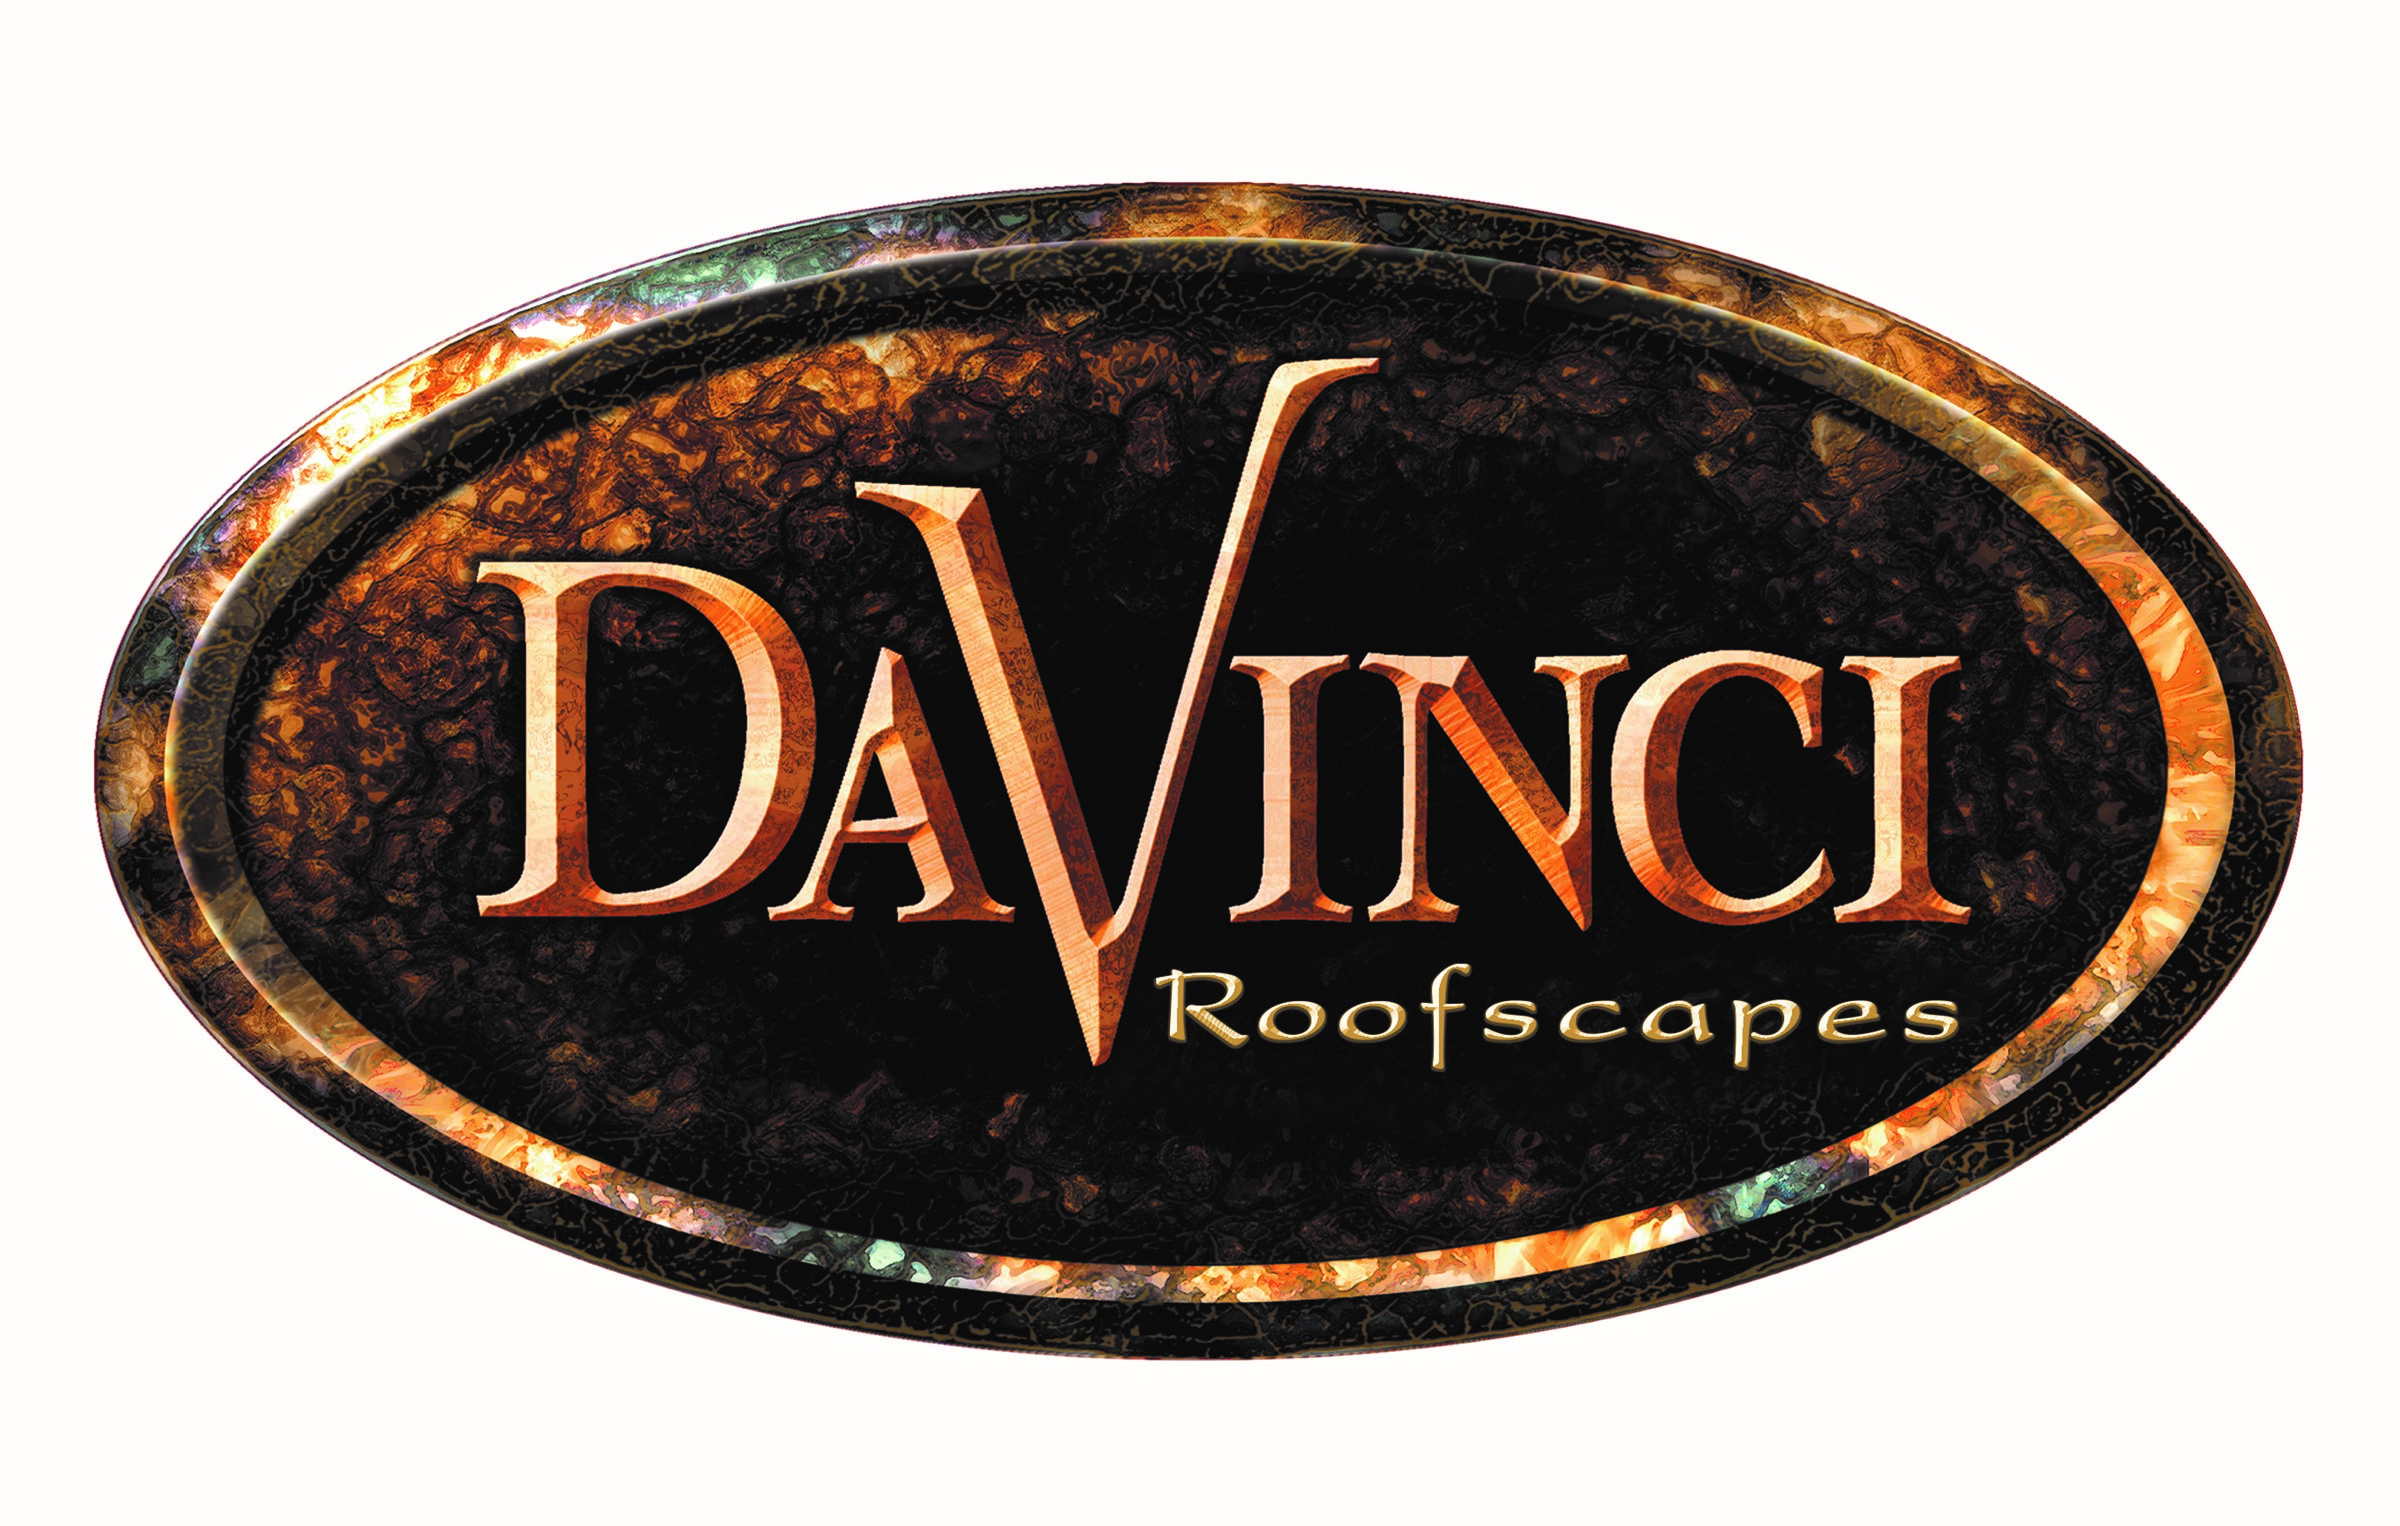 DaVinci Logo - DaVinci Roofscapes Acquired By Royal Building Products 06 10